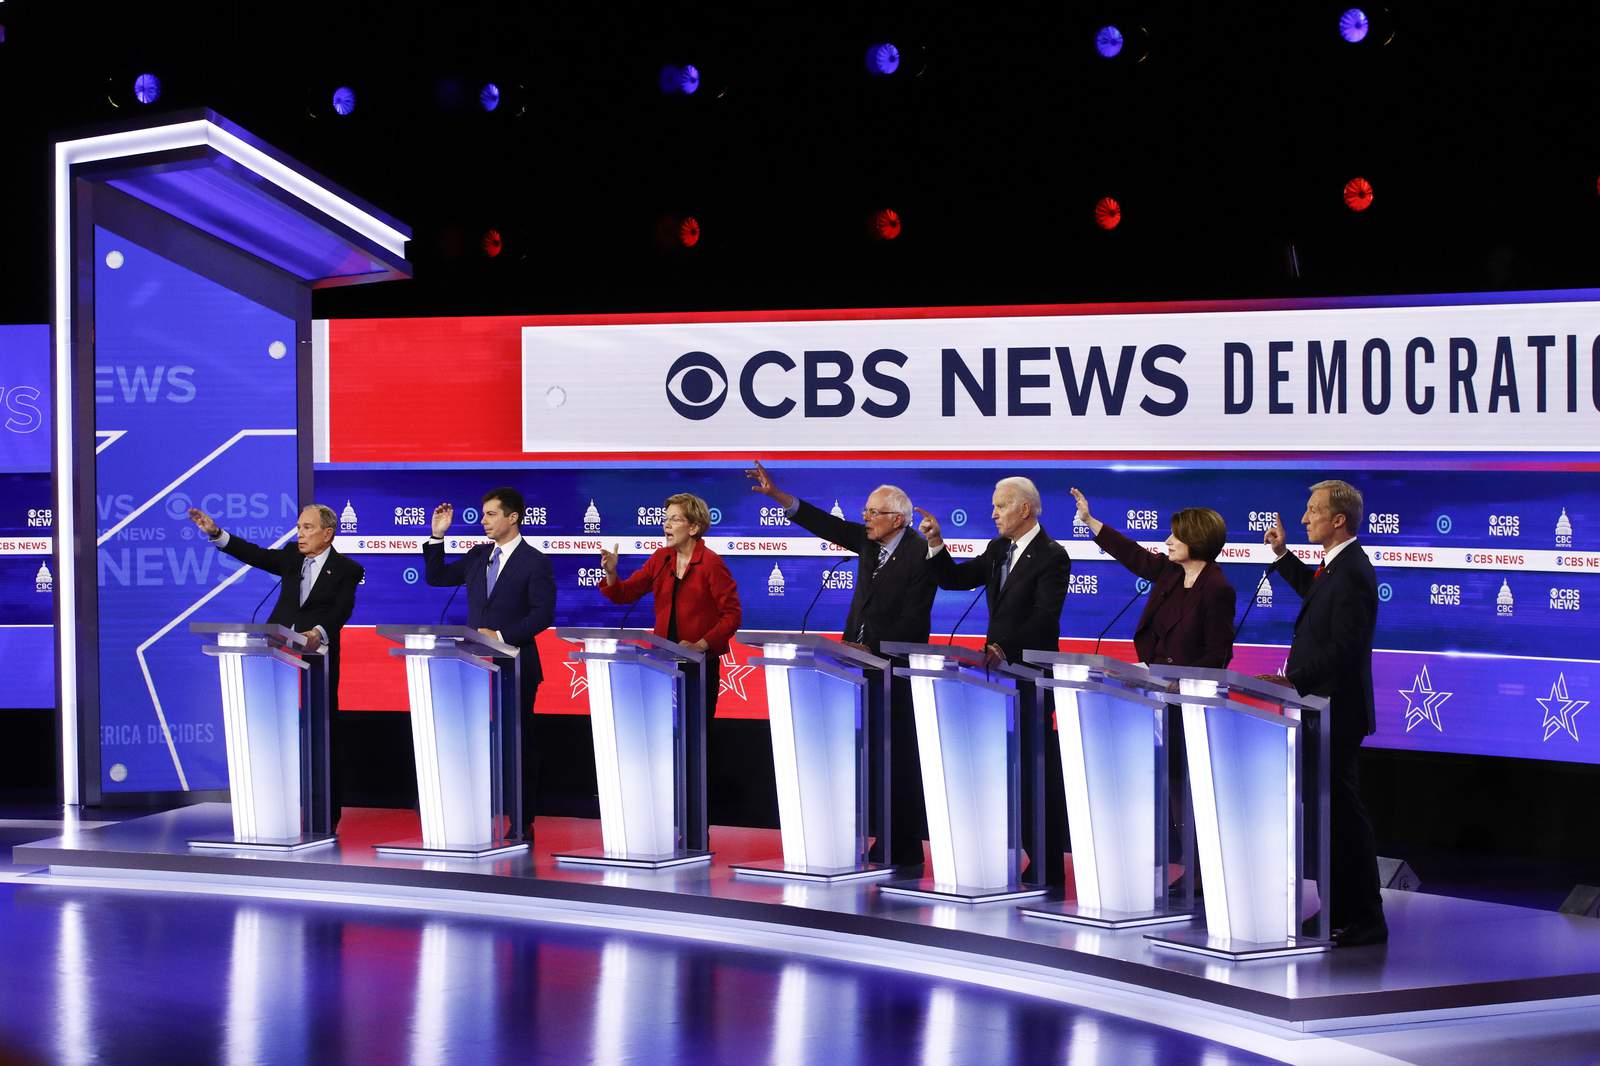 Rough debate performance by moderators a blow to CBS News